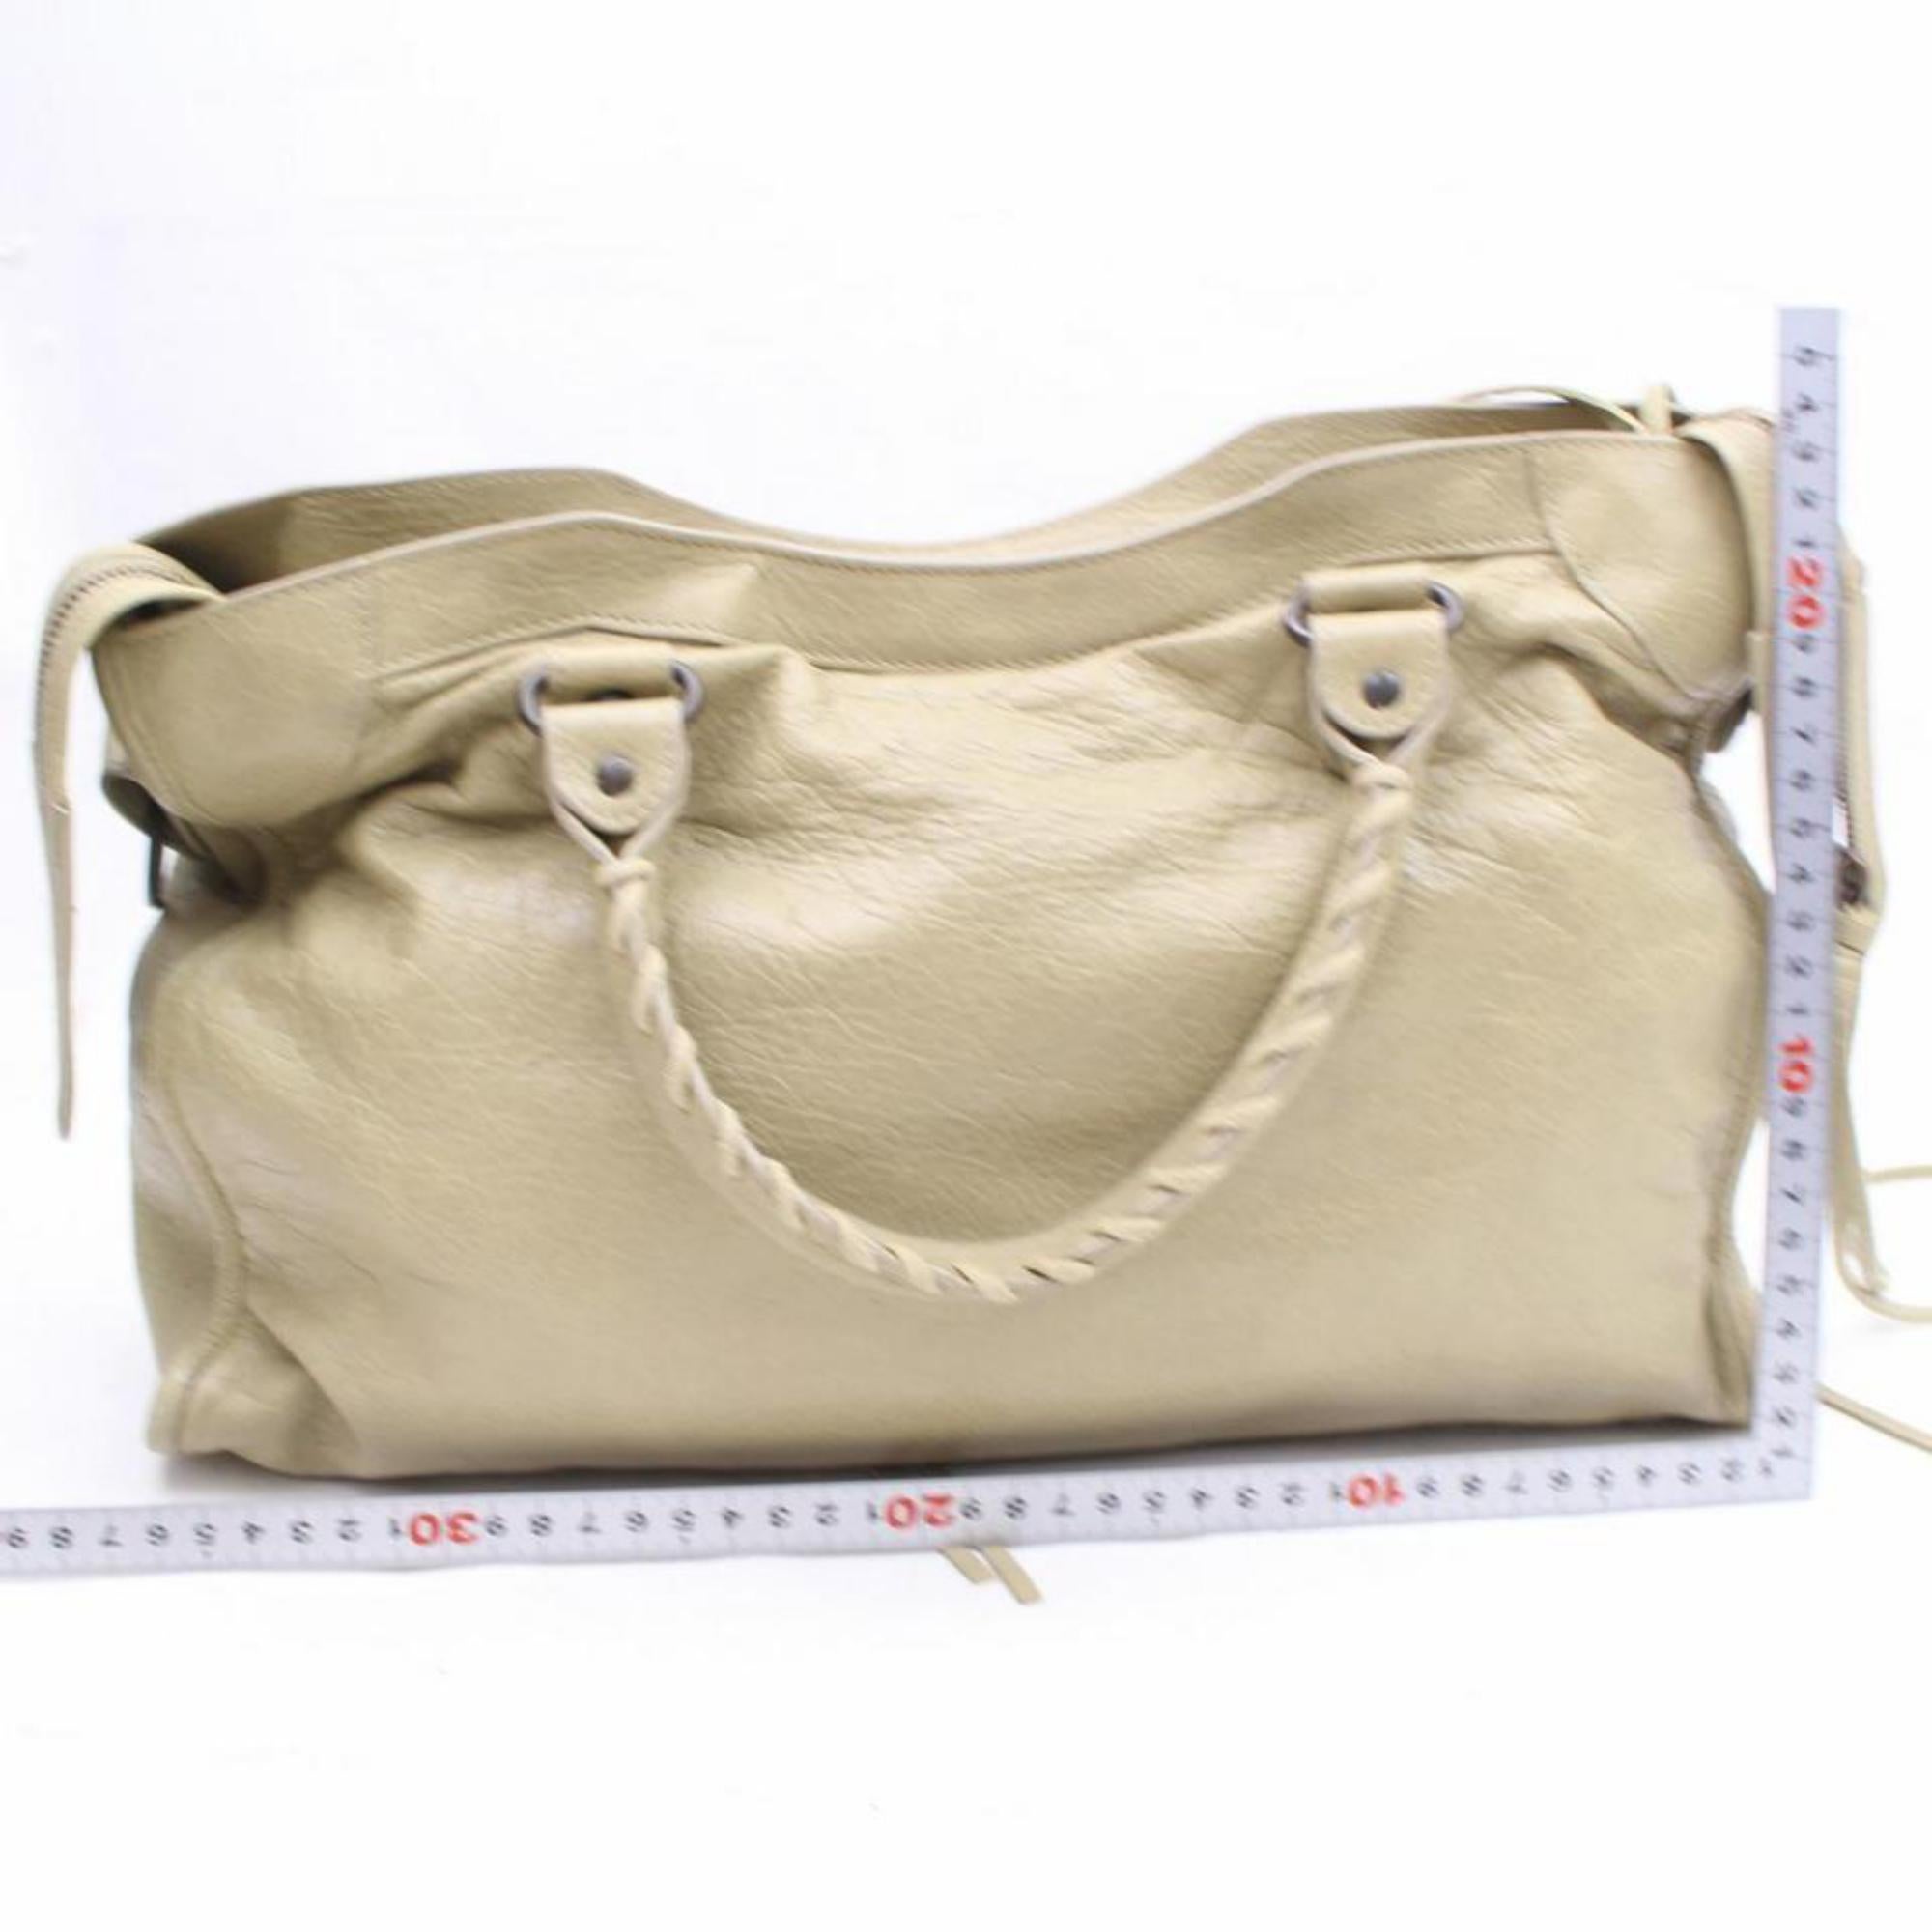 Balenciaga The City 2way 869864 Beige Leather Satchel For Sale 2